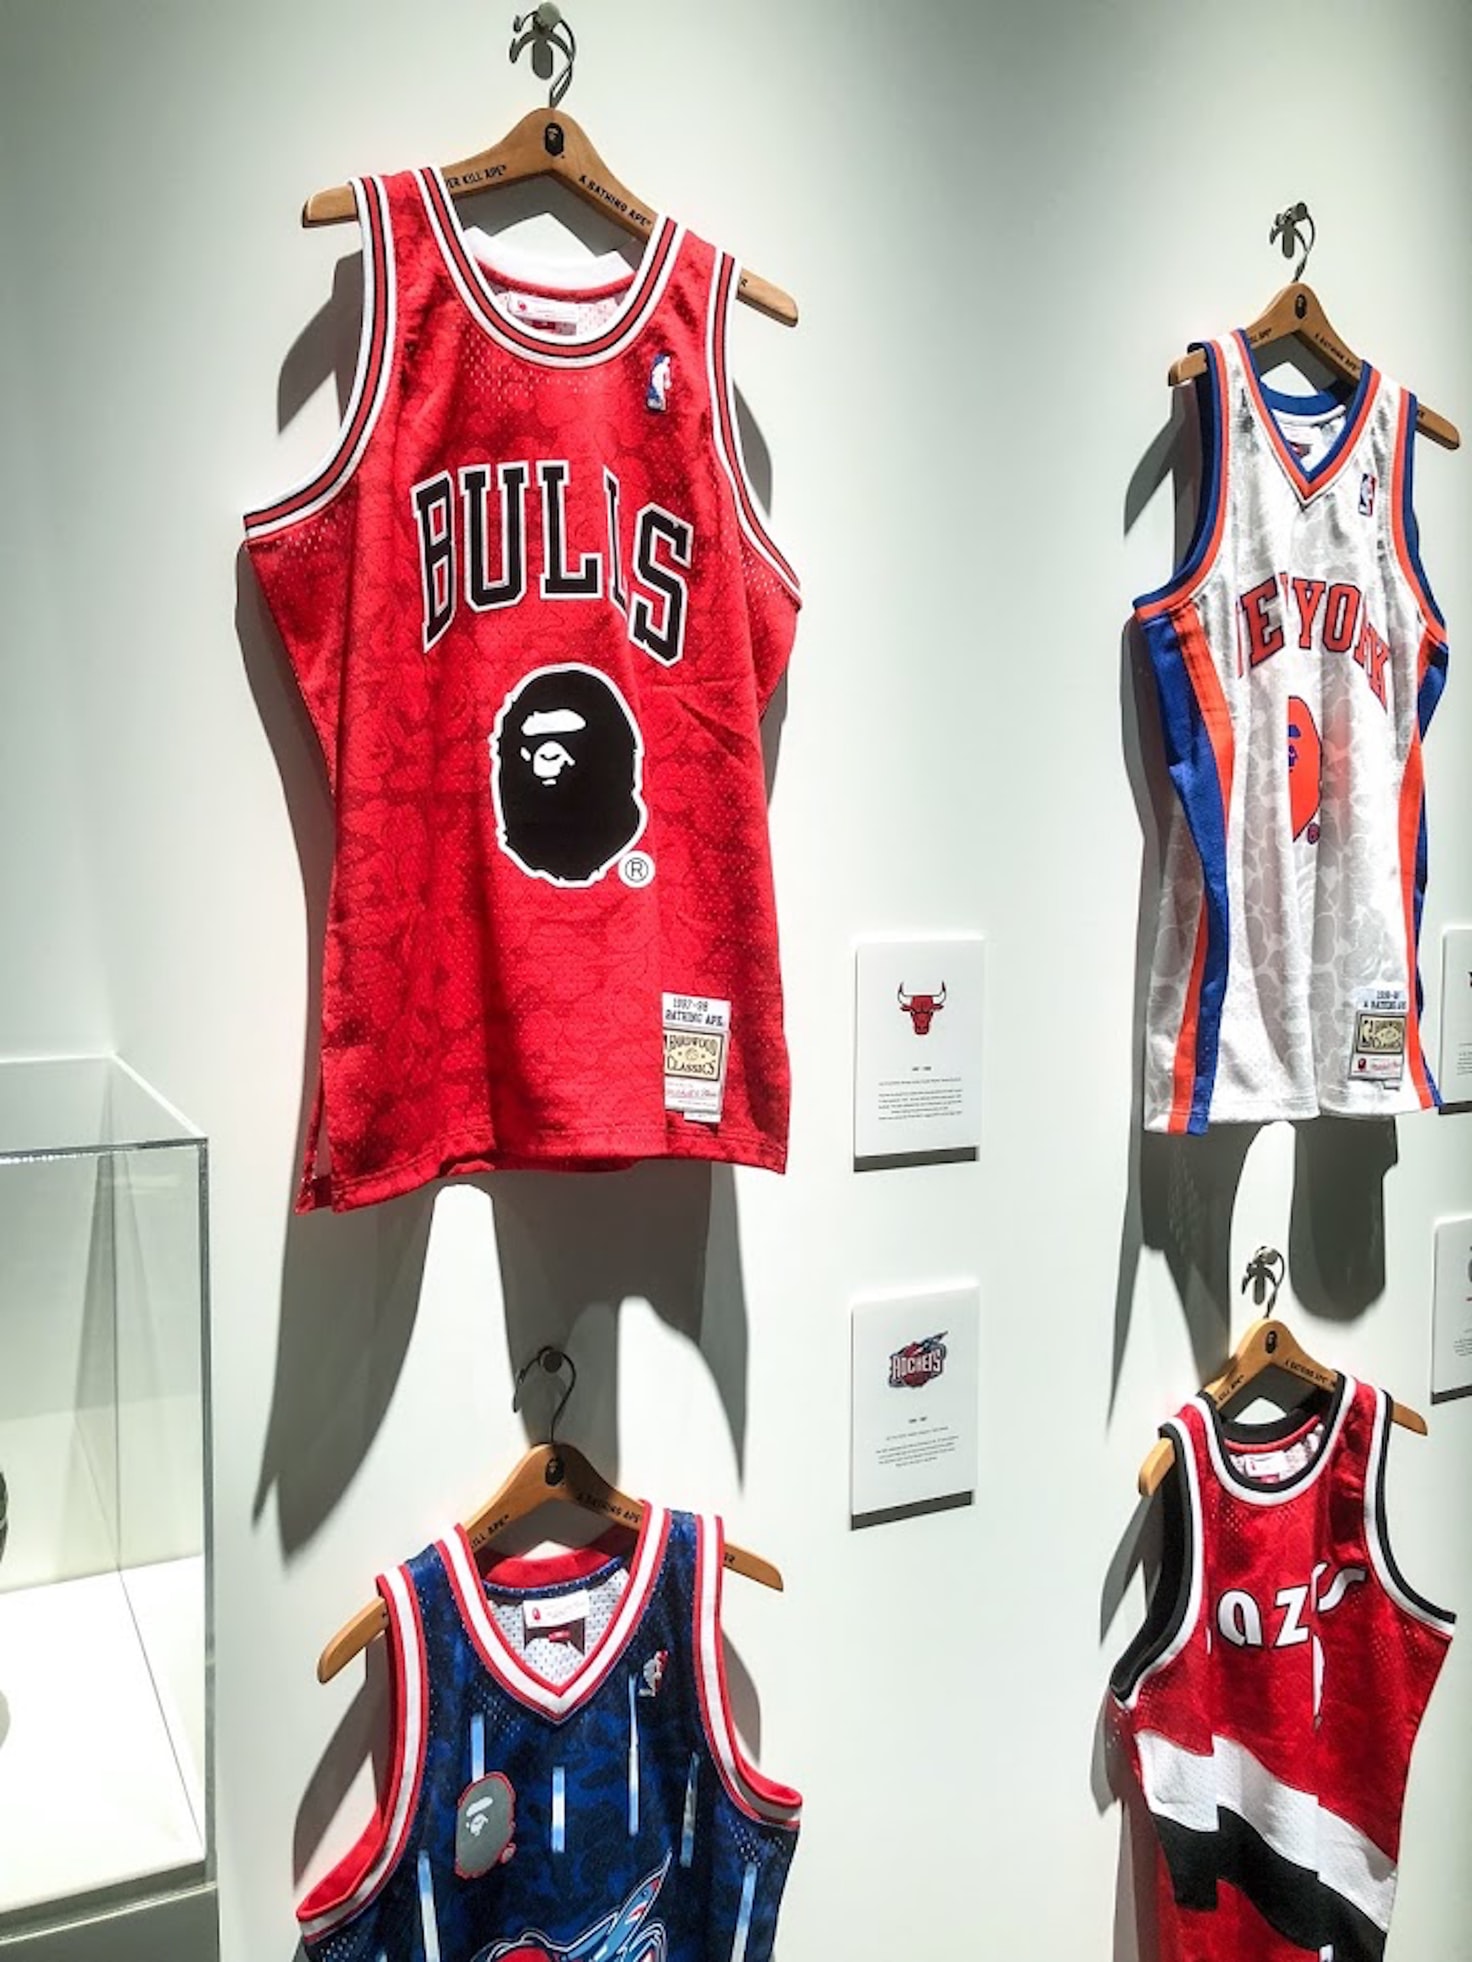 basketball jerseys hanging in a store